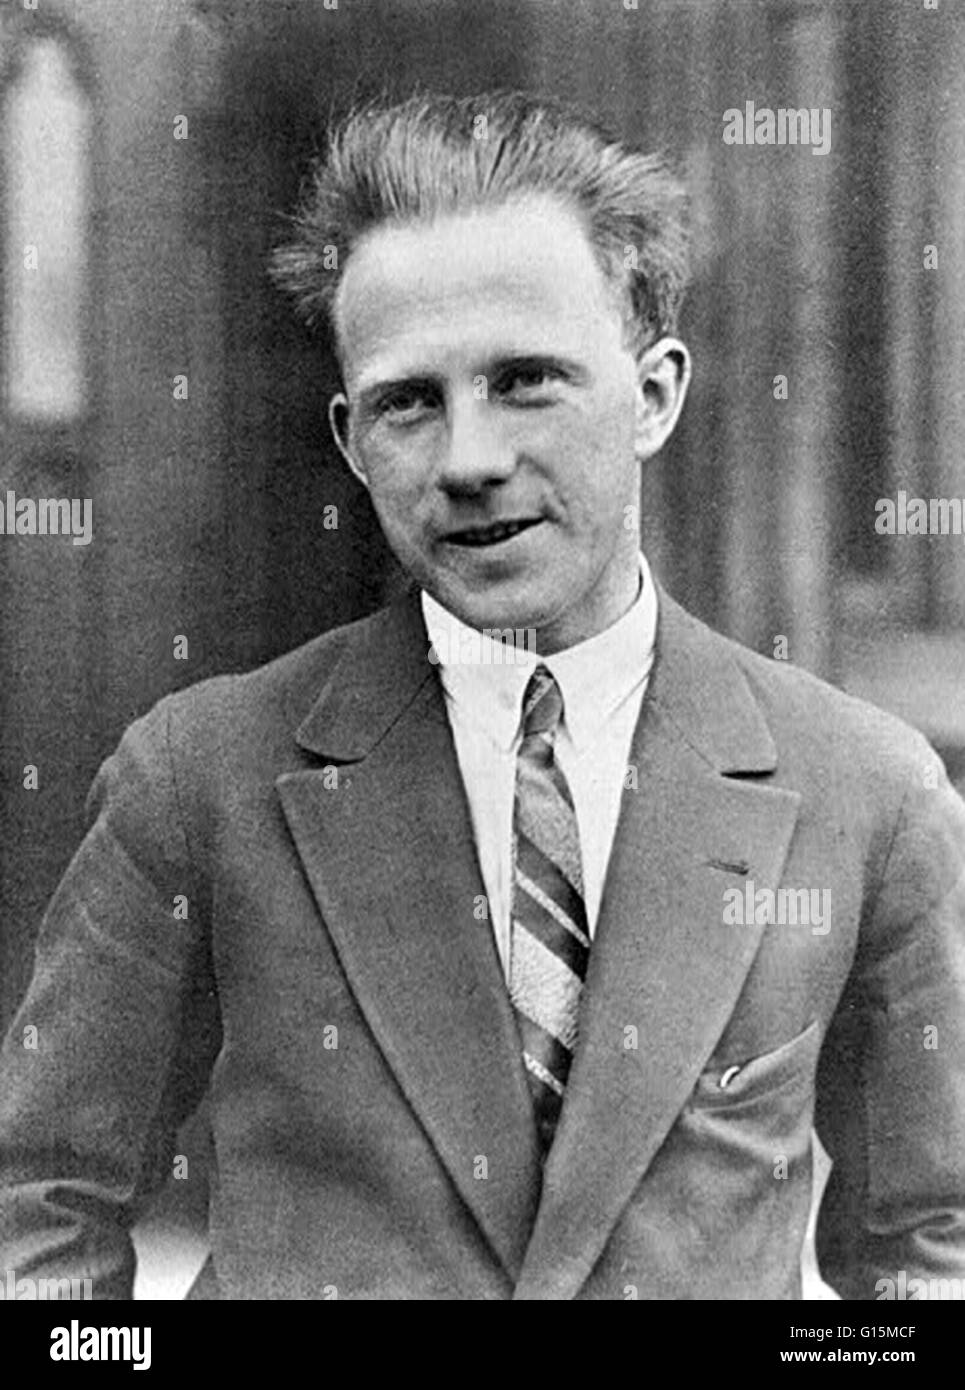 Werner Karl Heisenberg (December 5,1901 - February 1, 1976) was a German theoretical physicist who was awarded the Nobel Prize for Physics 'for the creation of quantum mechanics' in 1932. In 1925, Heisenberg, along with Max Born and Pascual Jordan, set fo Stock Photo